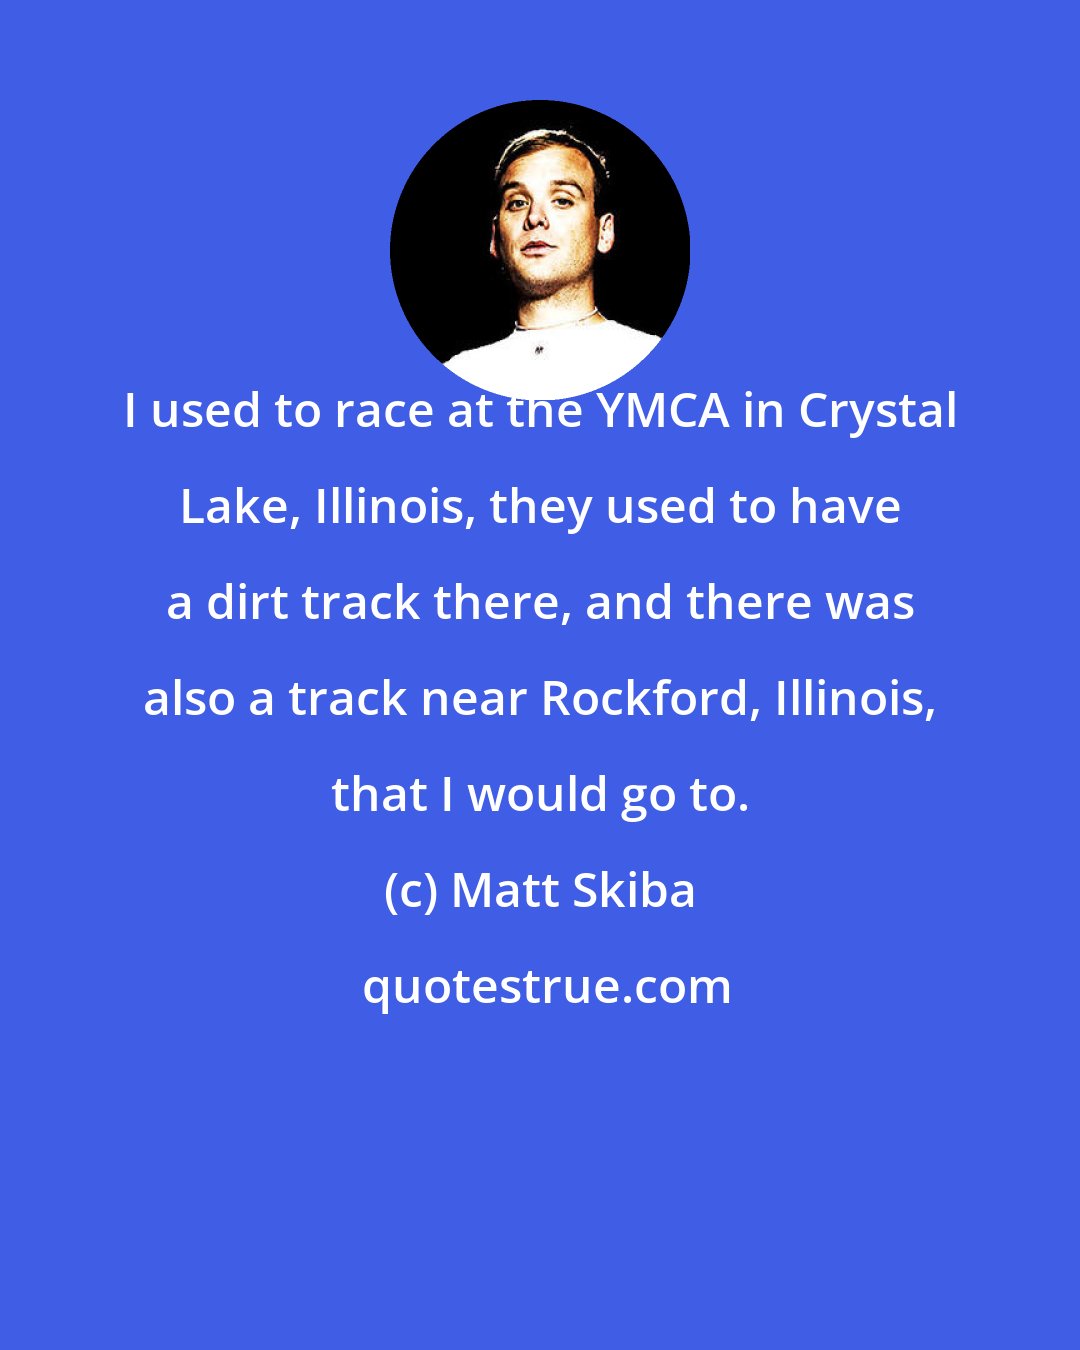 Matt Skiba: I used to race at the YMCA in Crystal Lake, Illinois, they used to have a dirt track there, and there was also a track near Rockford, Illinois, that I would go to.